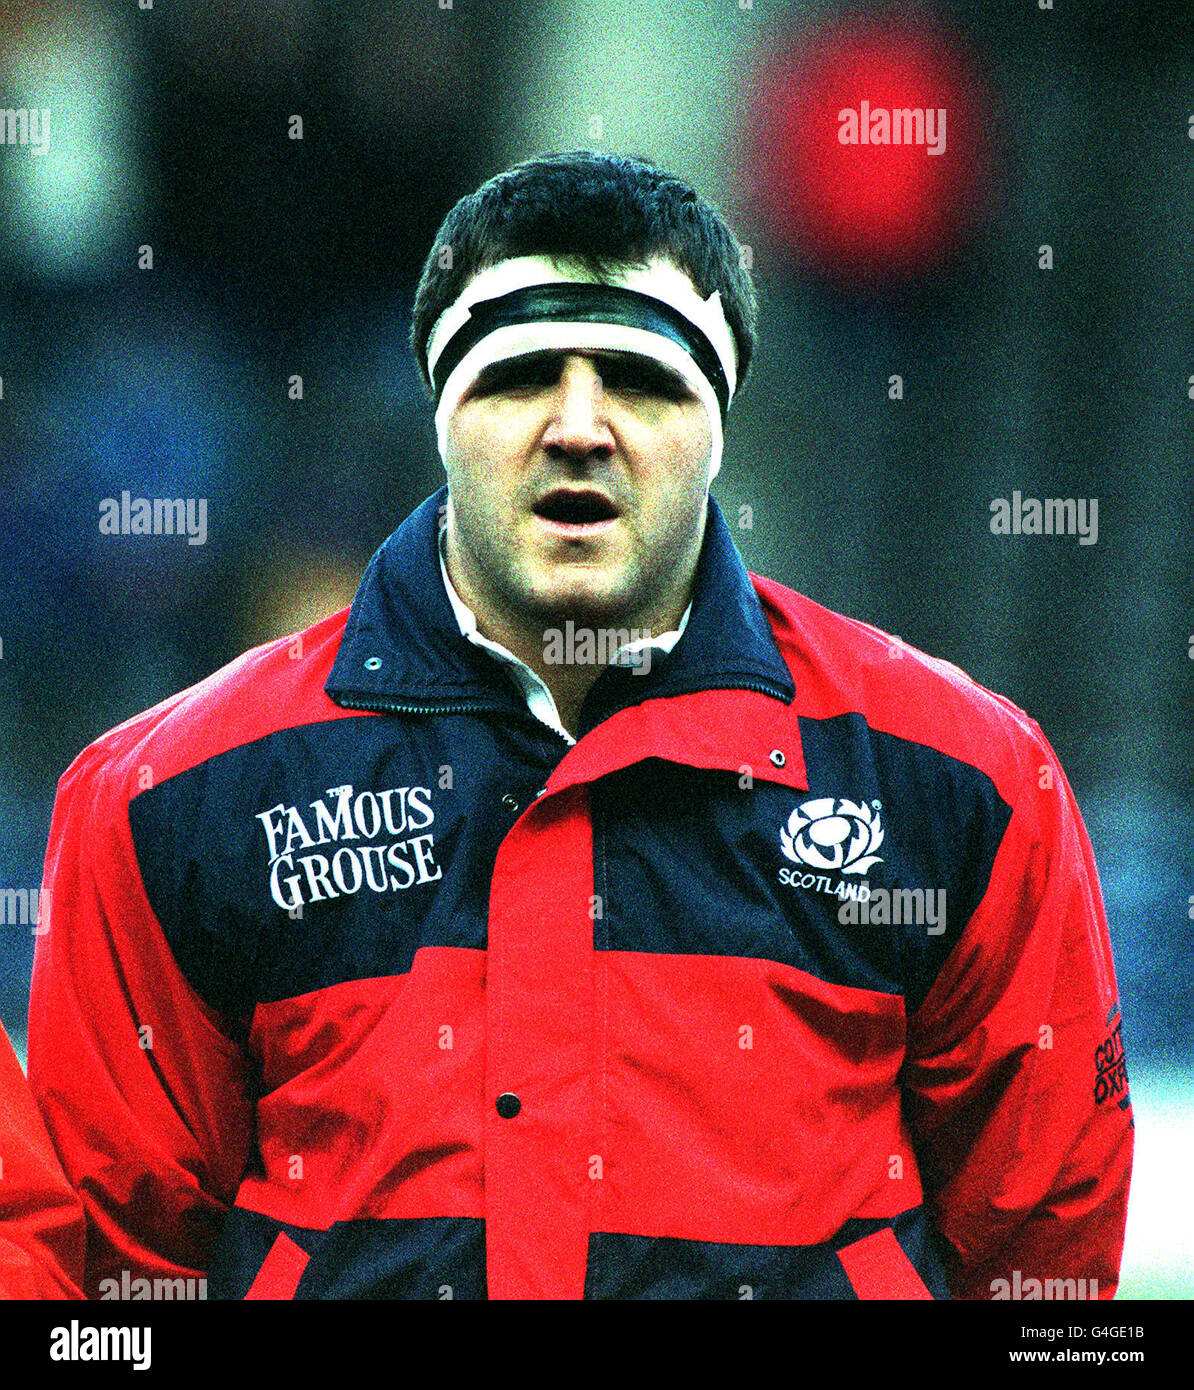 Tom Smith lines up with the Scotland rugby union squad before their World Cup qualifying match against Spain at Murrayfield. Tom's club side is Glasgow Caledonians and he plays in the Prop position. Stock Photo